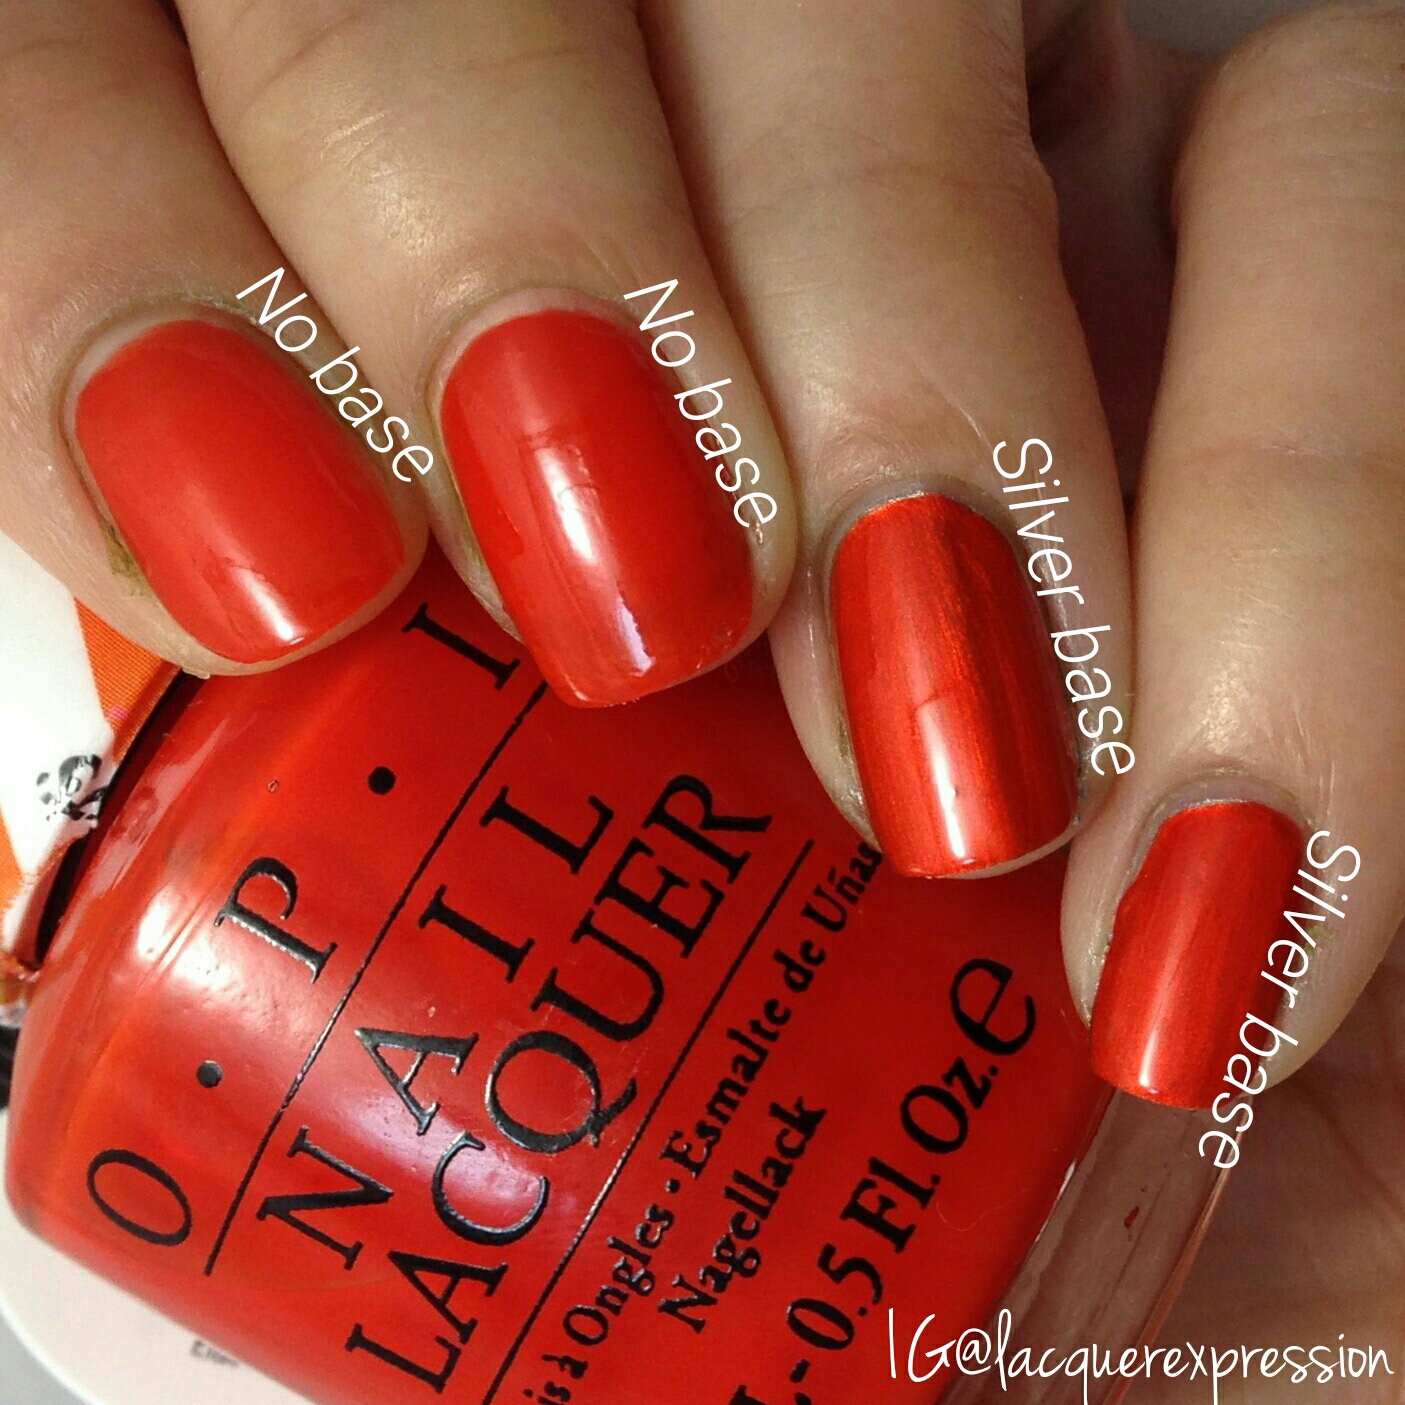 Swatch and Review - OPI Color Paint Collection Part I - LacquerExpression